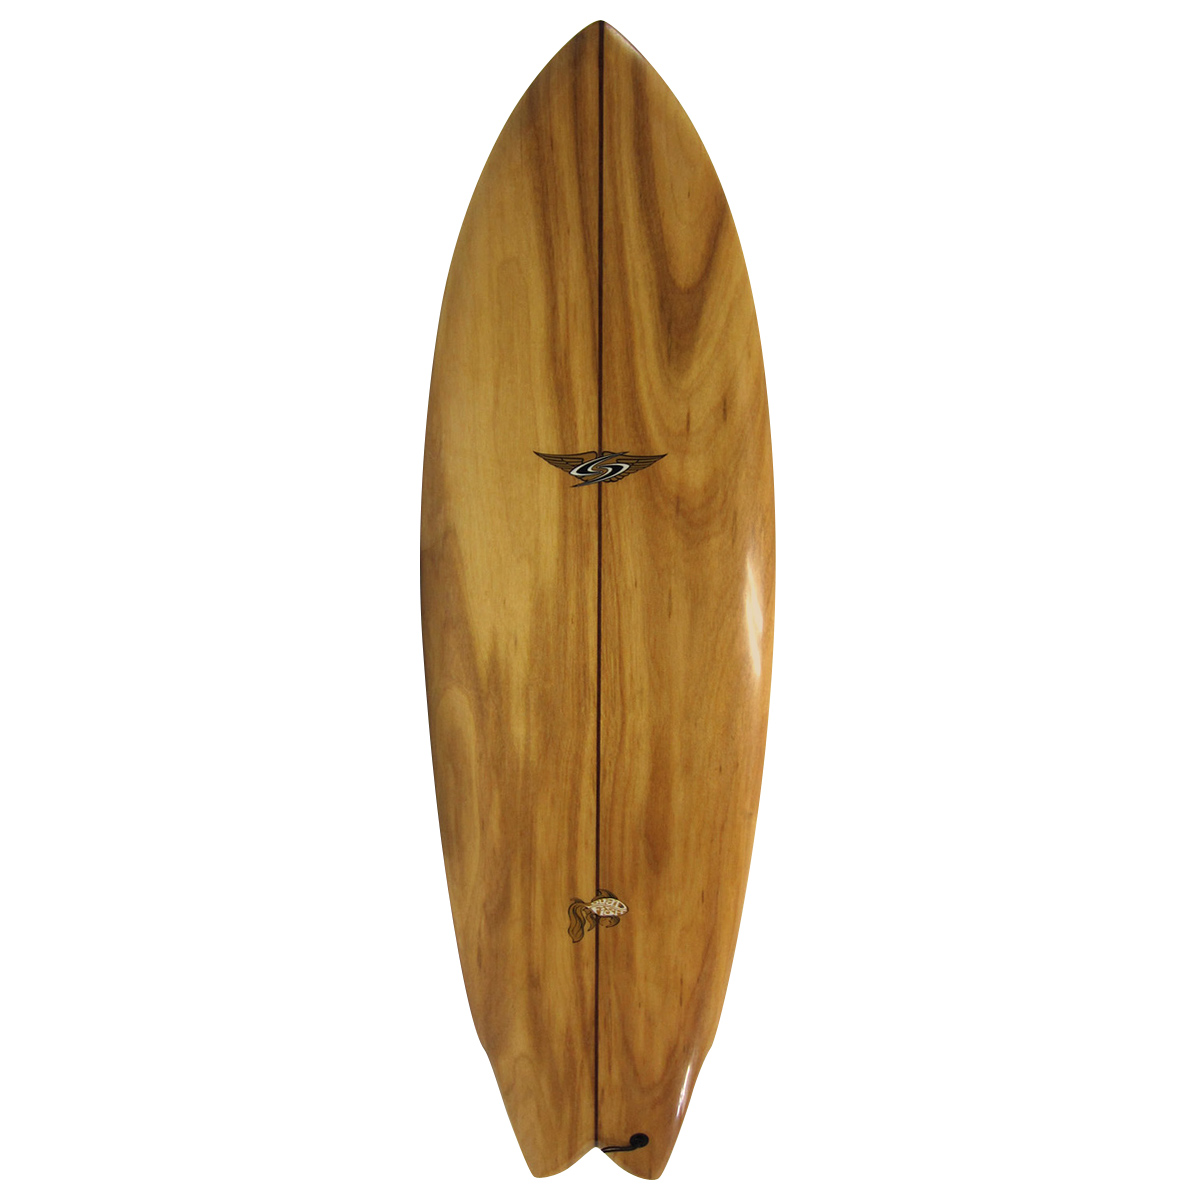  / RANDY FRENCH / 5`10 Soul Fish Woody Surftech